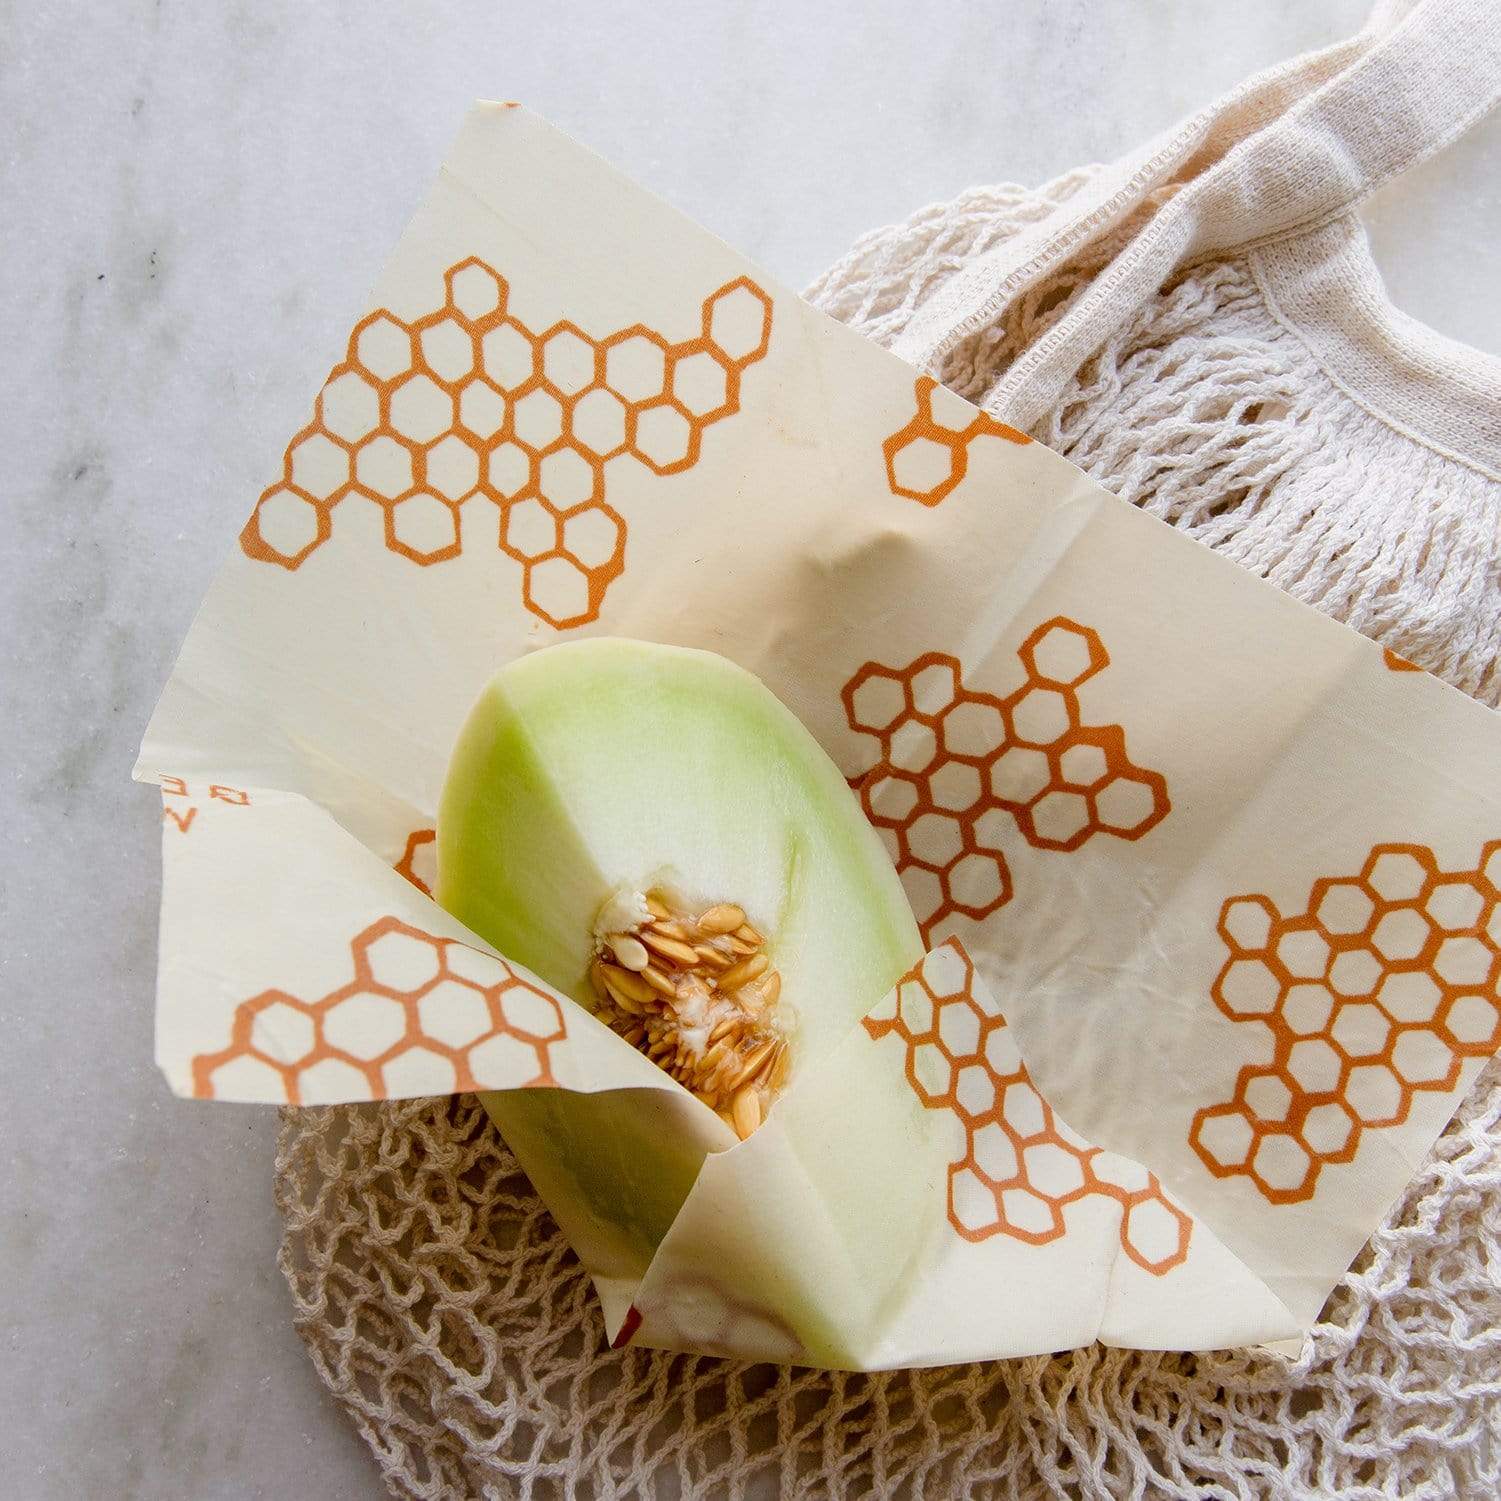 Beeswax wrap covering a quarter of a melon